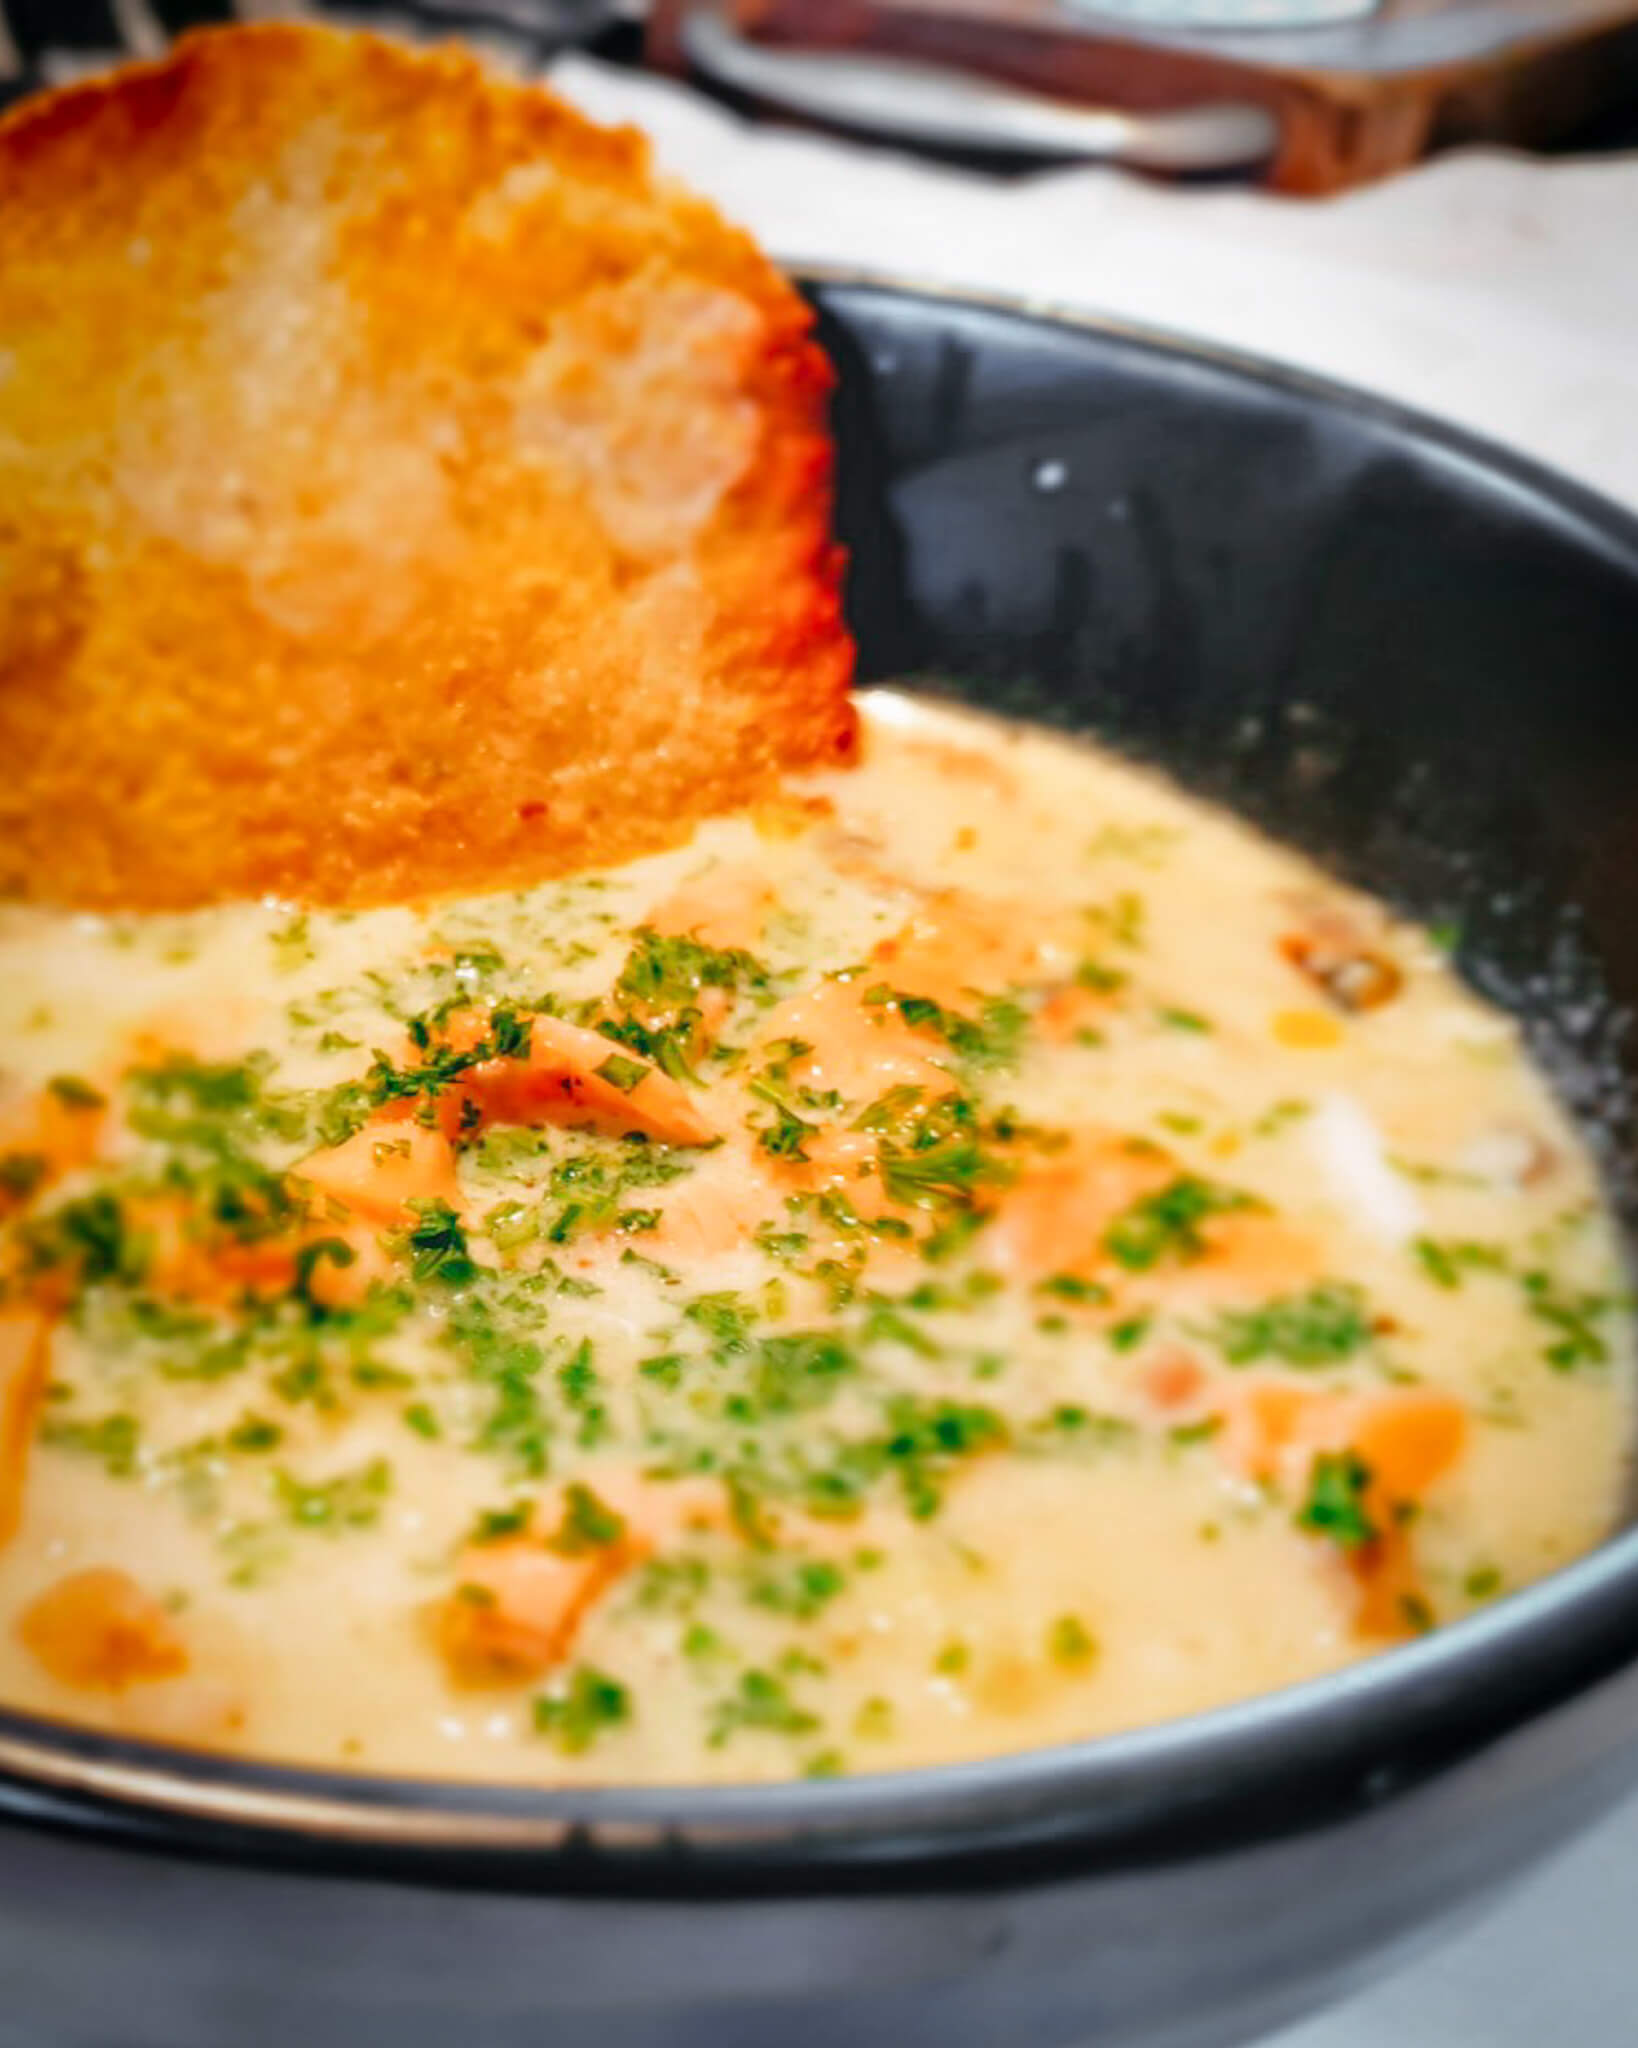 Dive into Delight: The Best Seafood Chowder Recipe